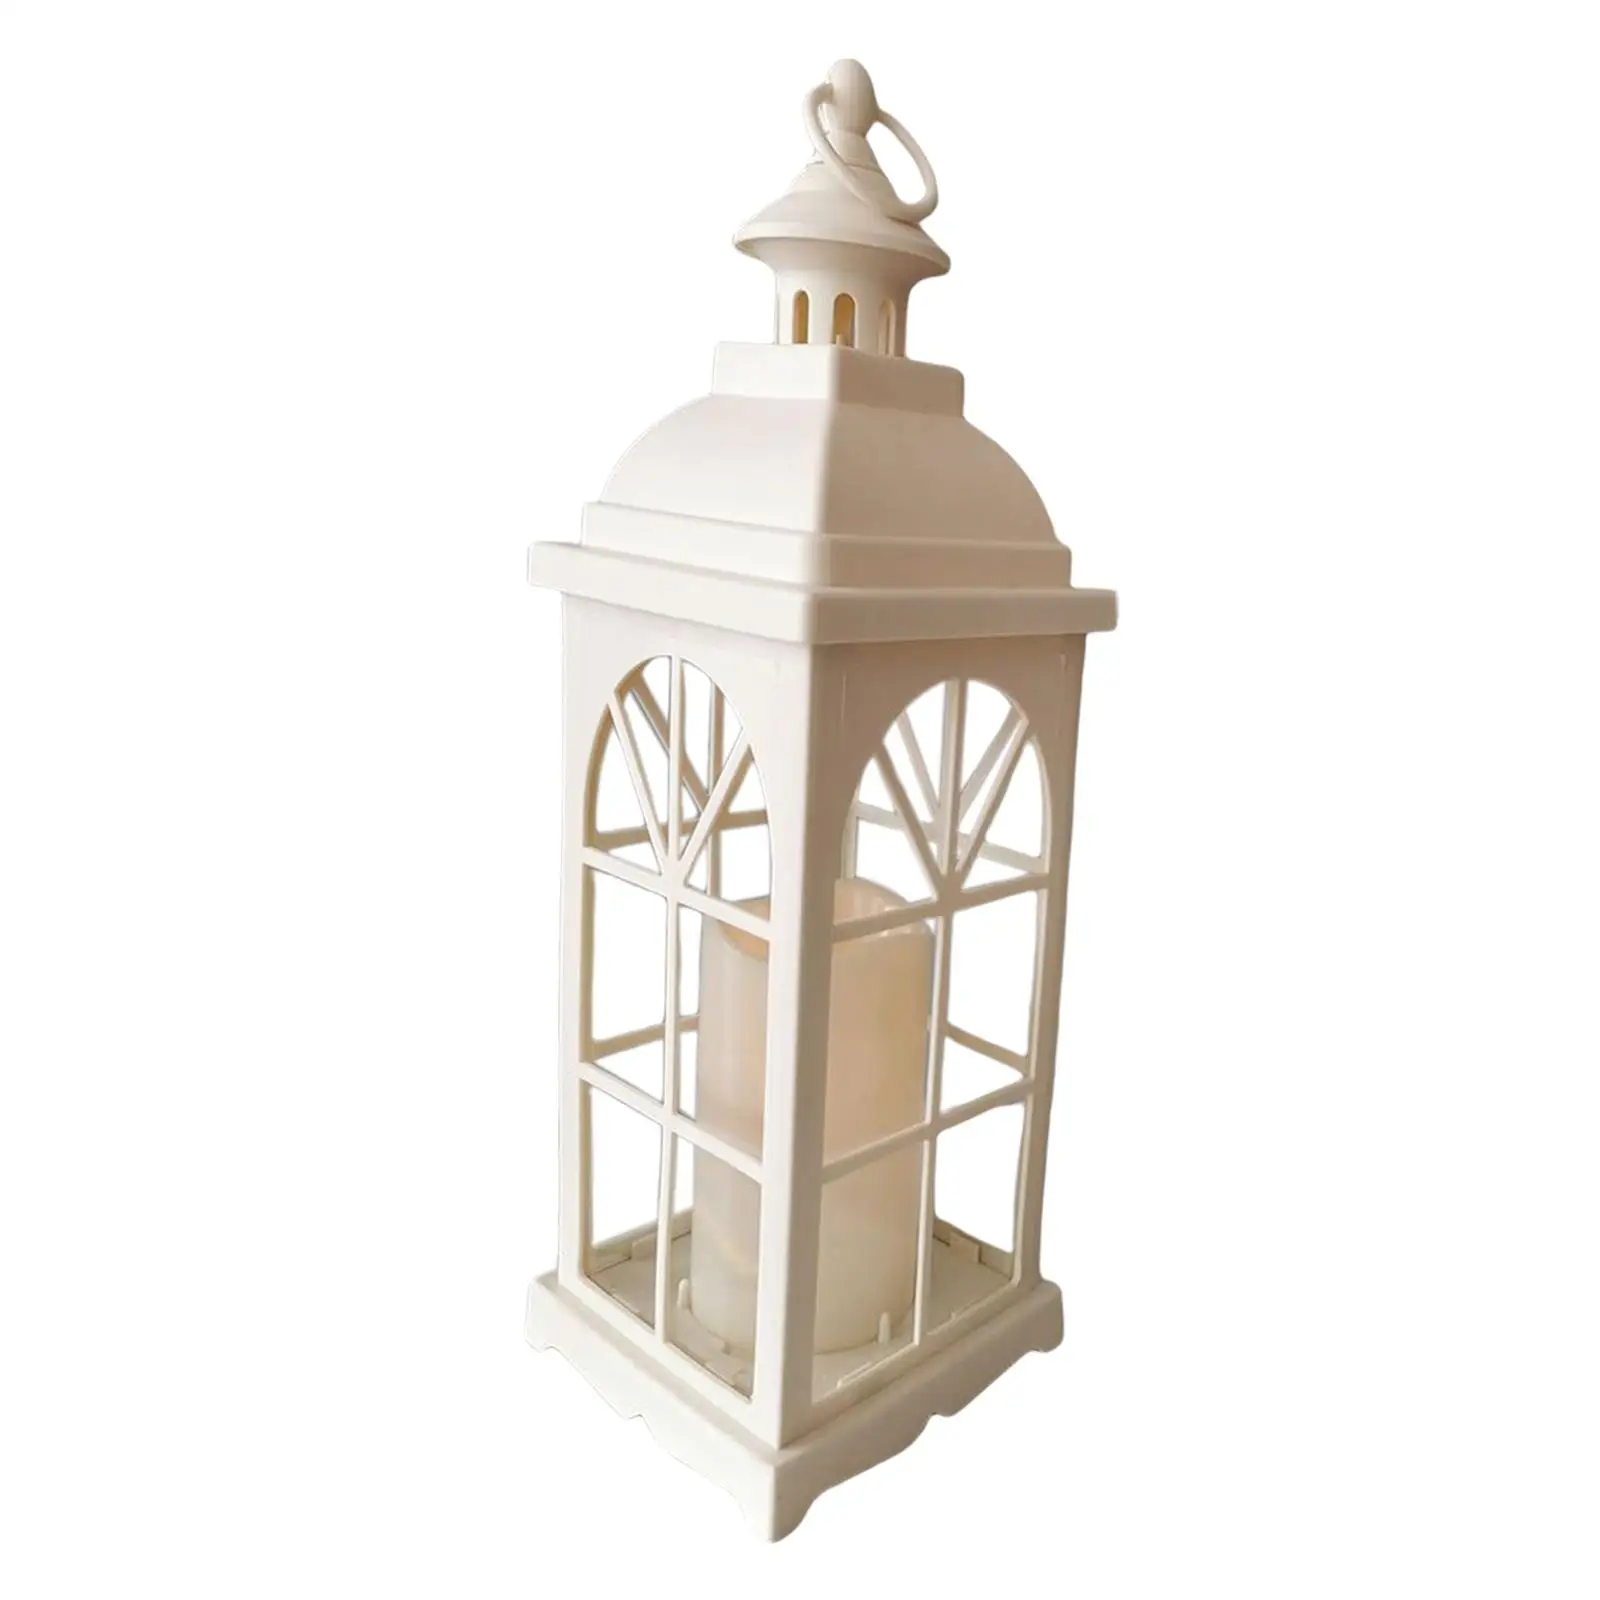 European Style Candle Lantern Candle Holder Farmhouse Lantern Wind Lamp Candlestick for Party Living Room Garden Decor